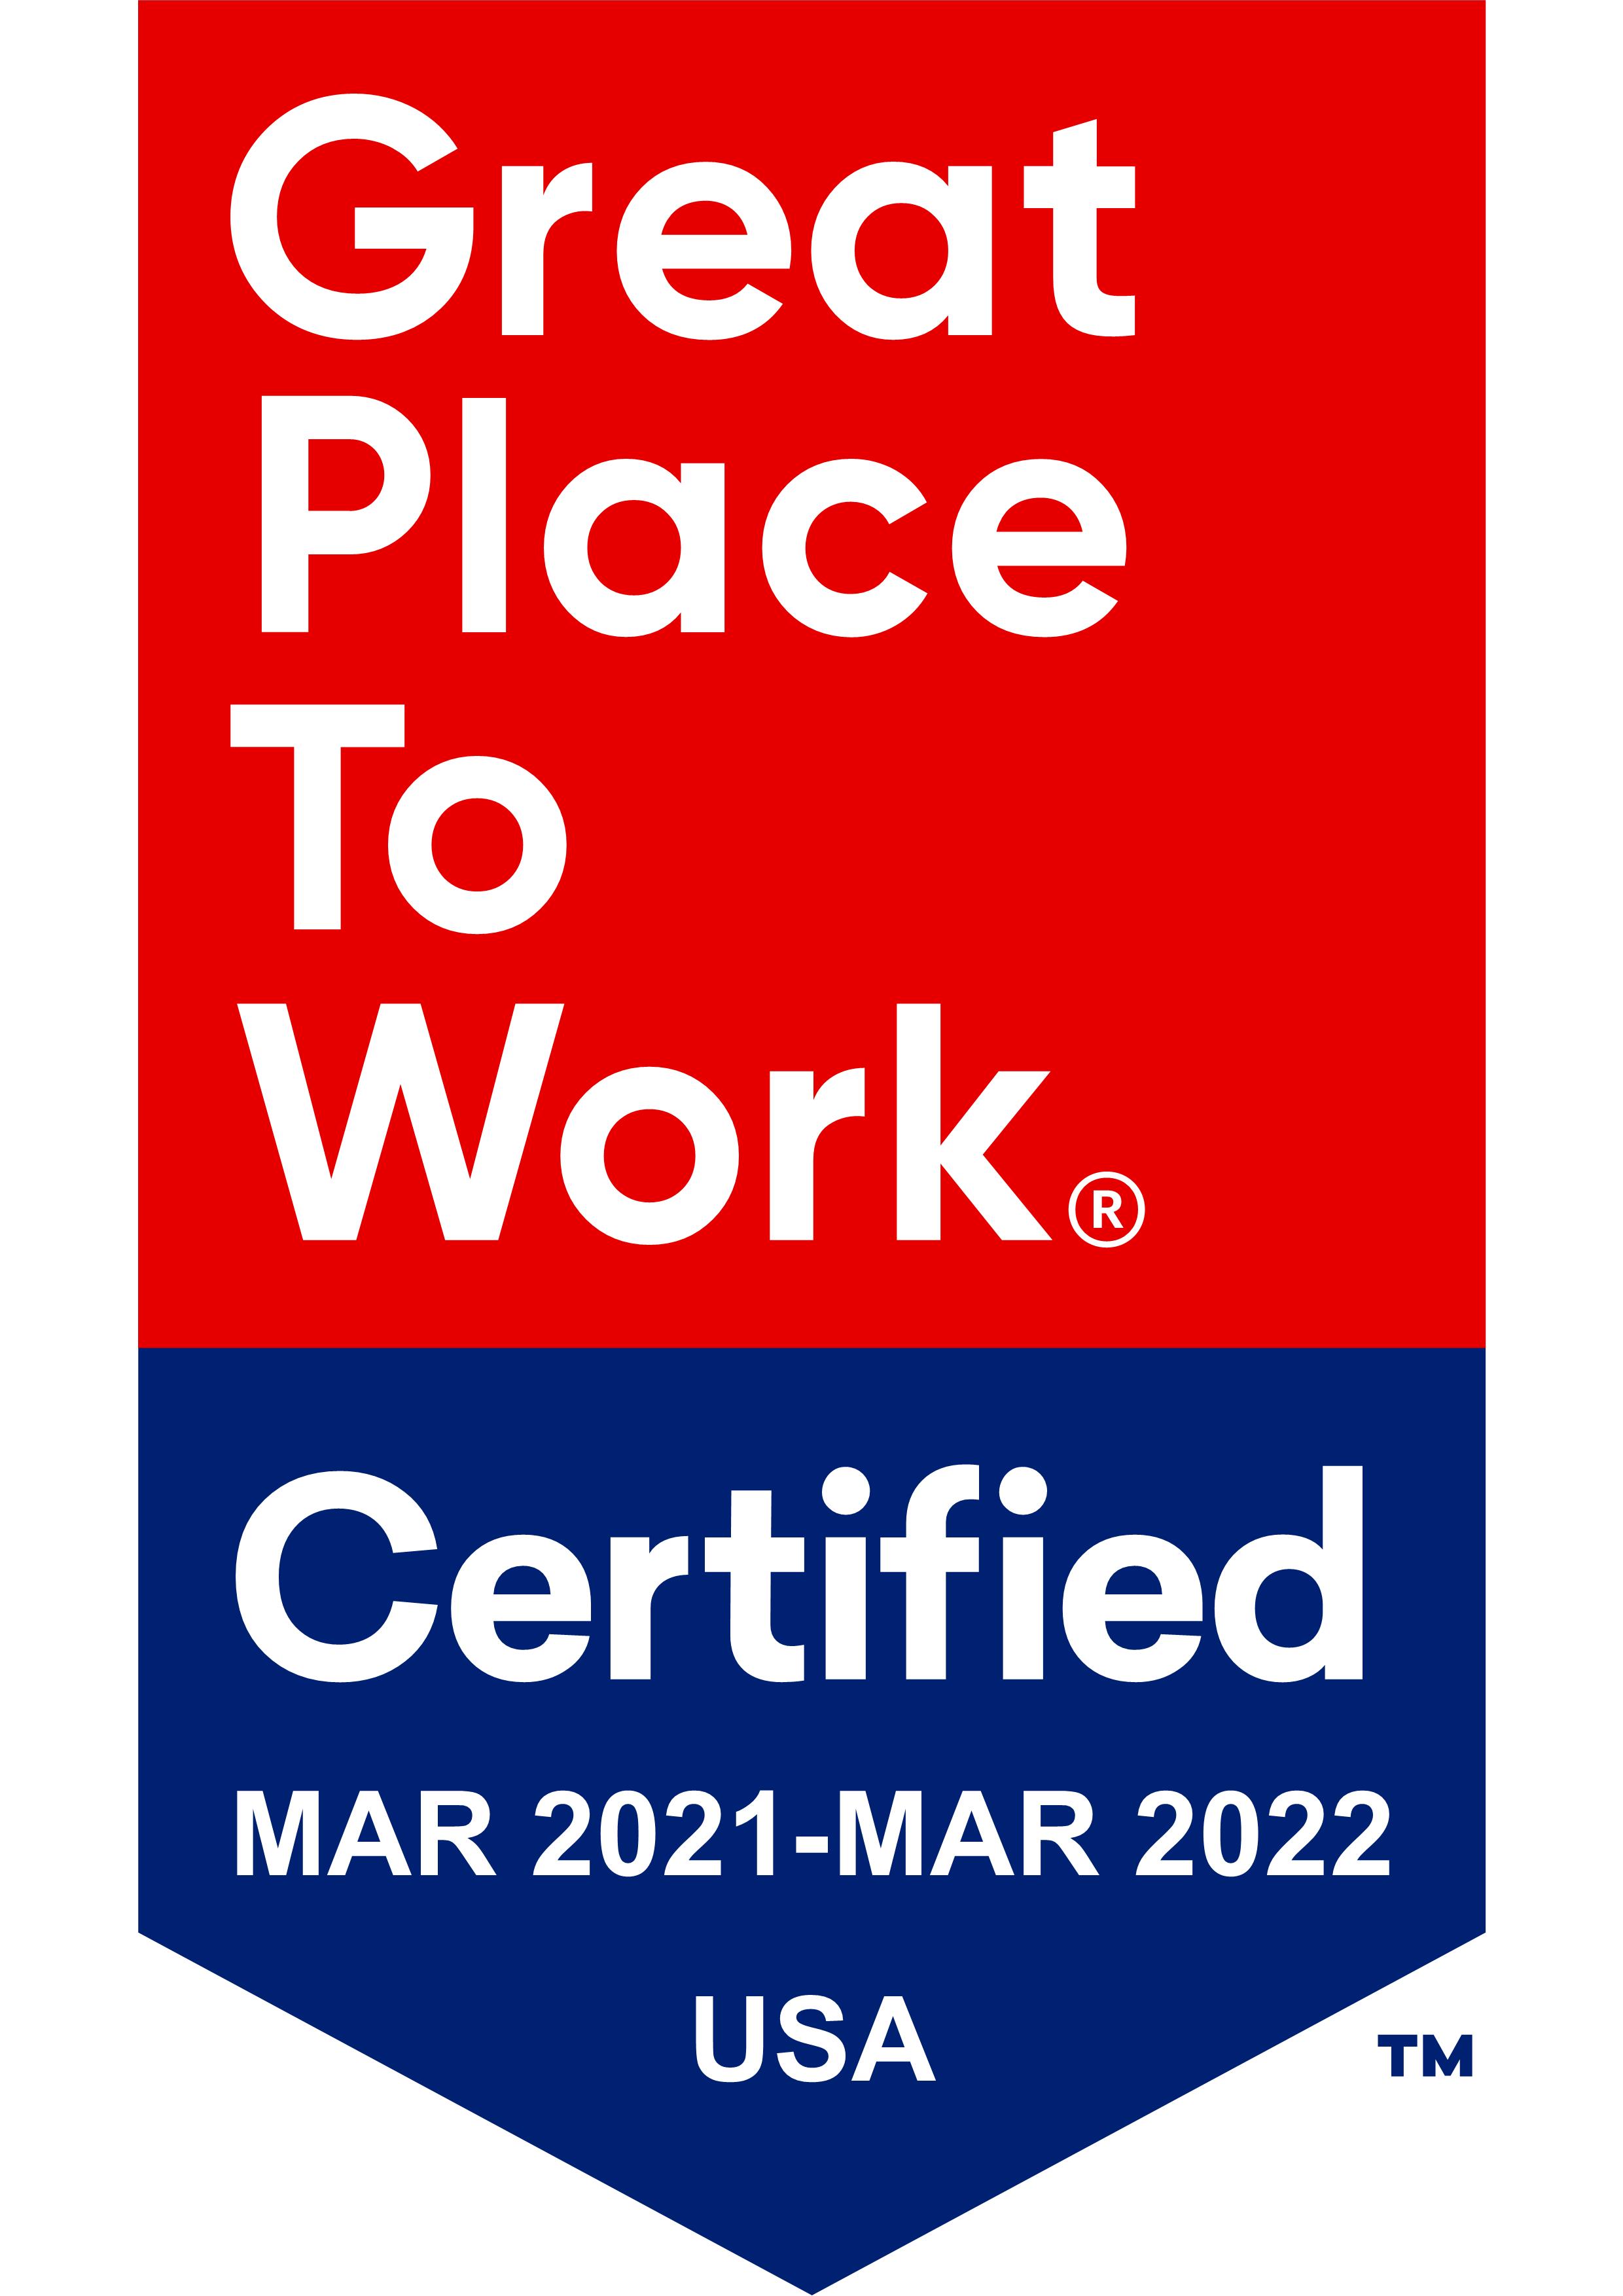 RTI Earns 2021 Great Place to Work Certification in the U.S. and Spain for the Third Consecutive Year